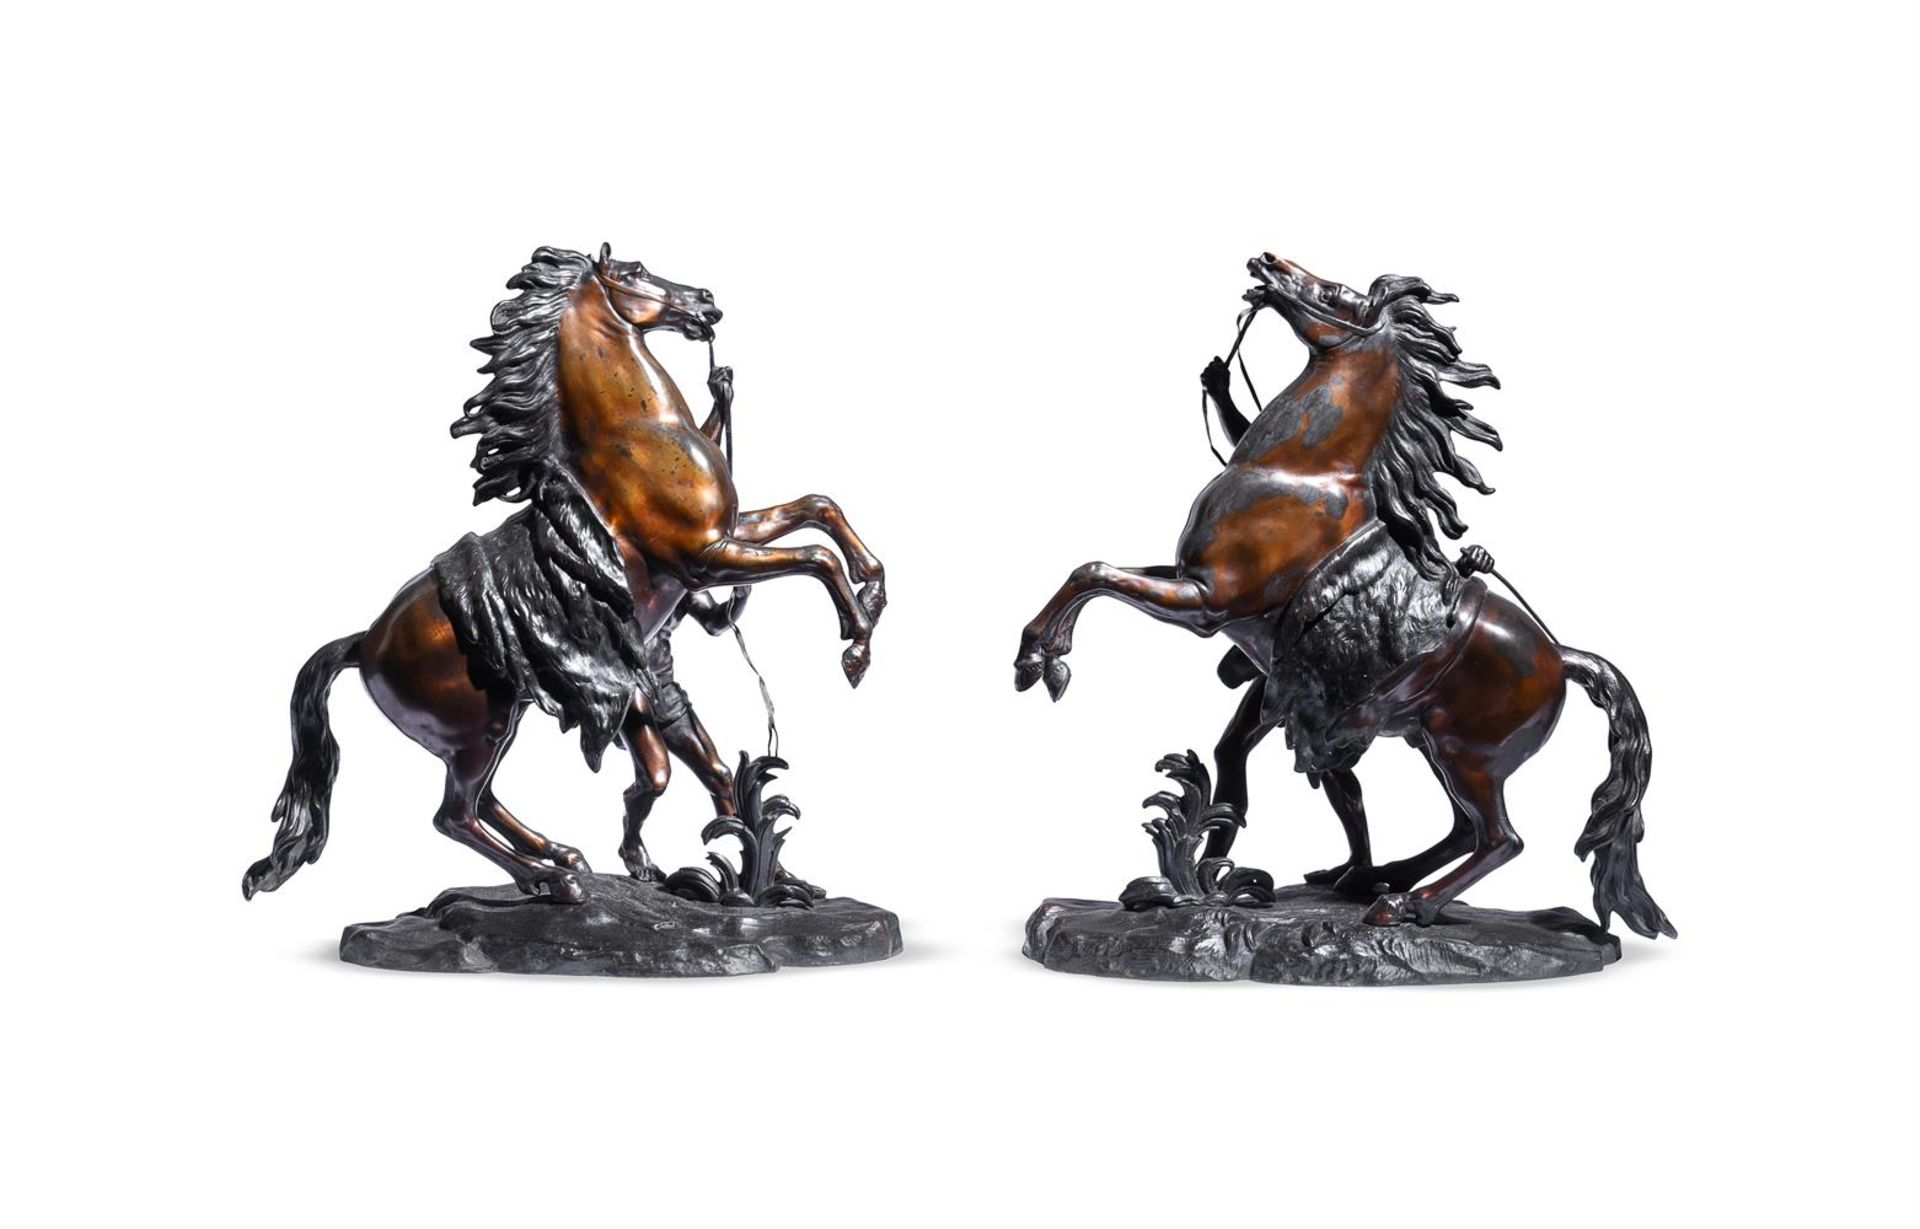 AFTER COUSTOU, A LARGE PAIR OF BRONZE MARLY HORSES FRENCH, 19TH CENTURY - Image 7 of 7